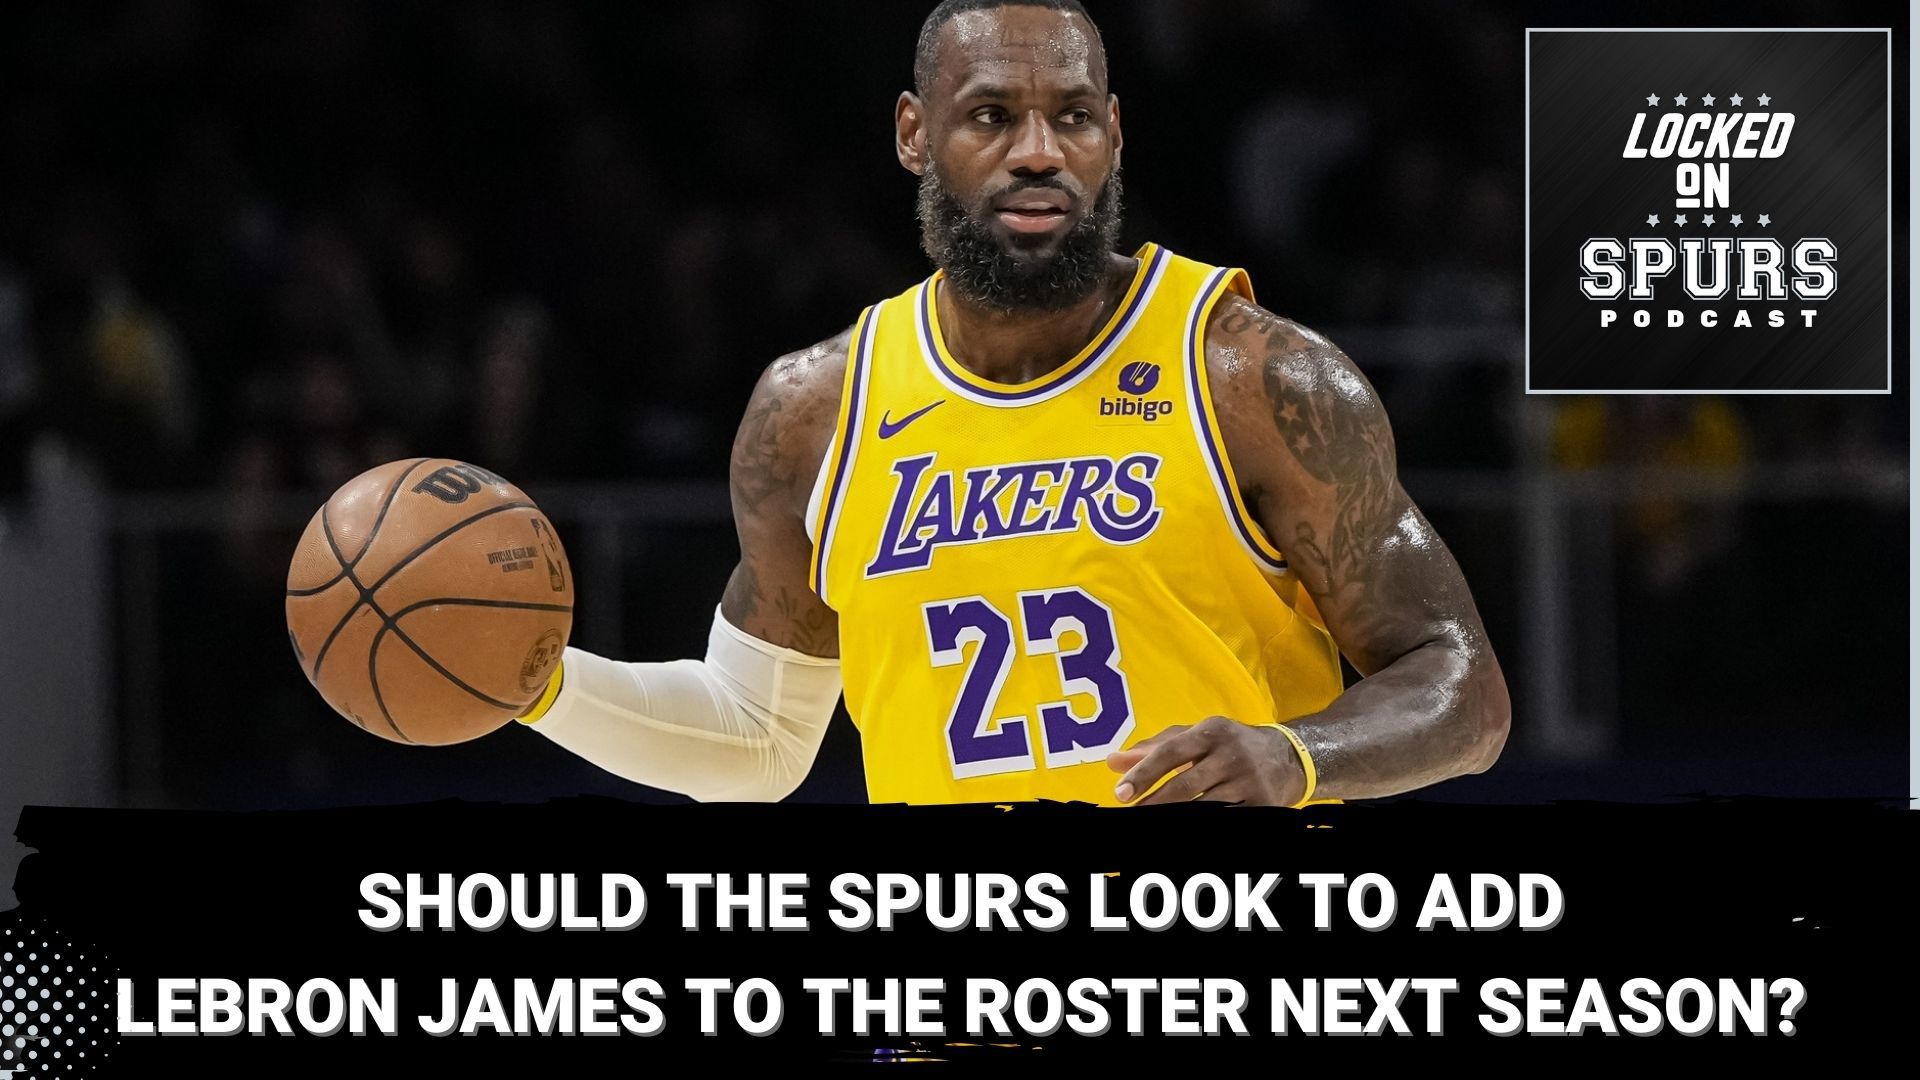 Is adding the 39-year-old NBA vet to the young Spurs roster a good move?